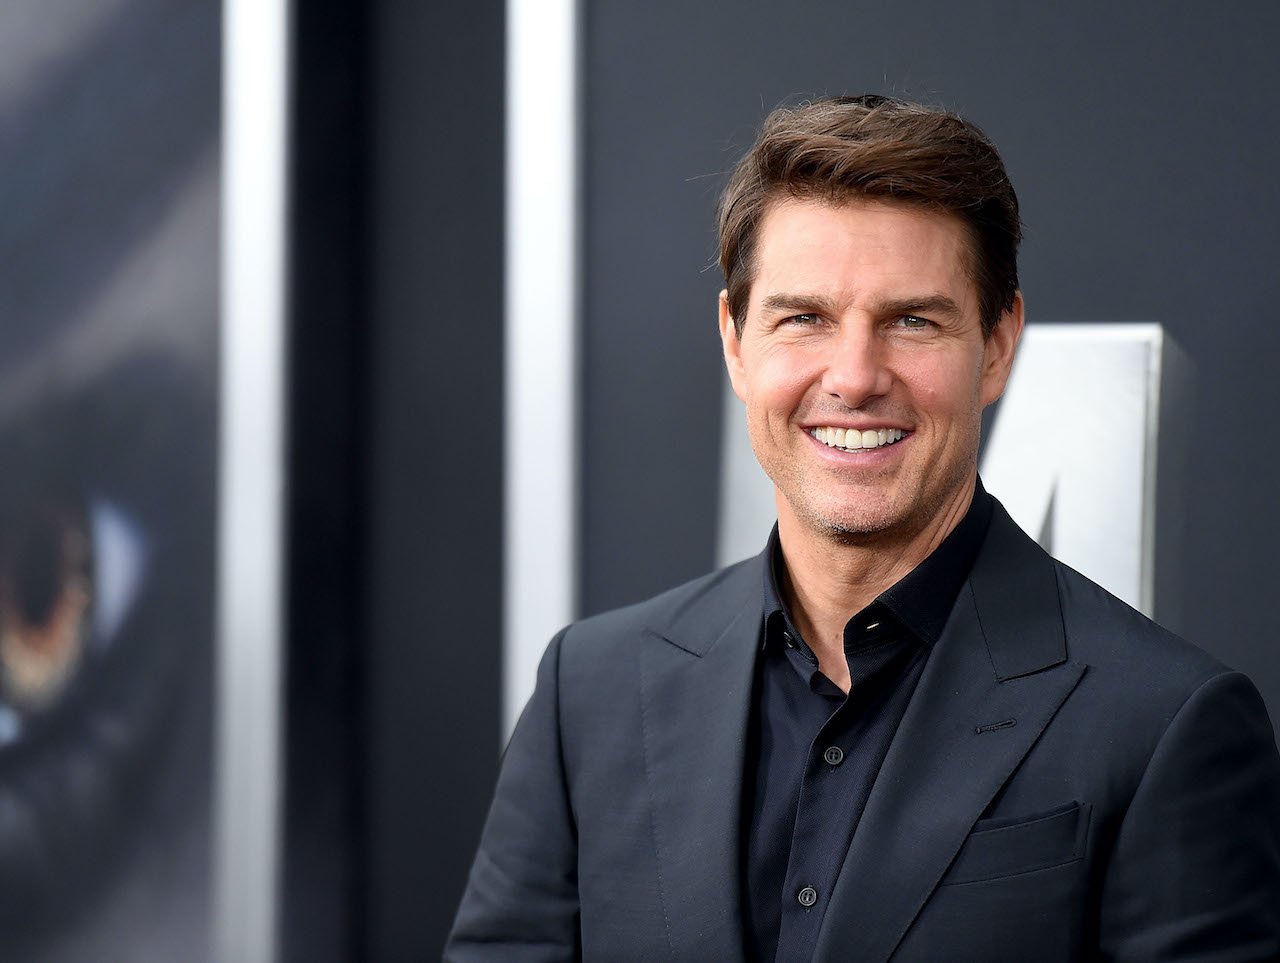 Tom cruise attends the "The Mummy" New York Fan Event at AMC Loews Lincoln Square 